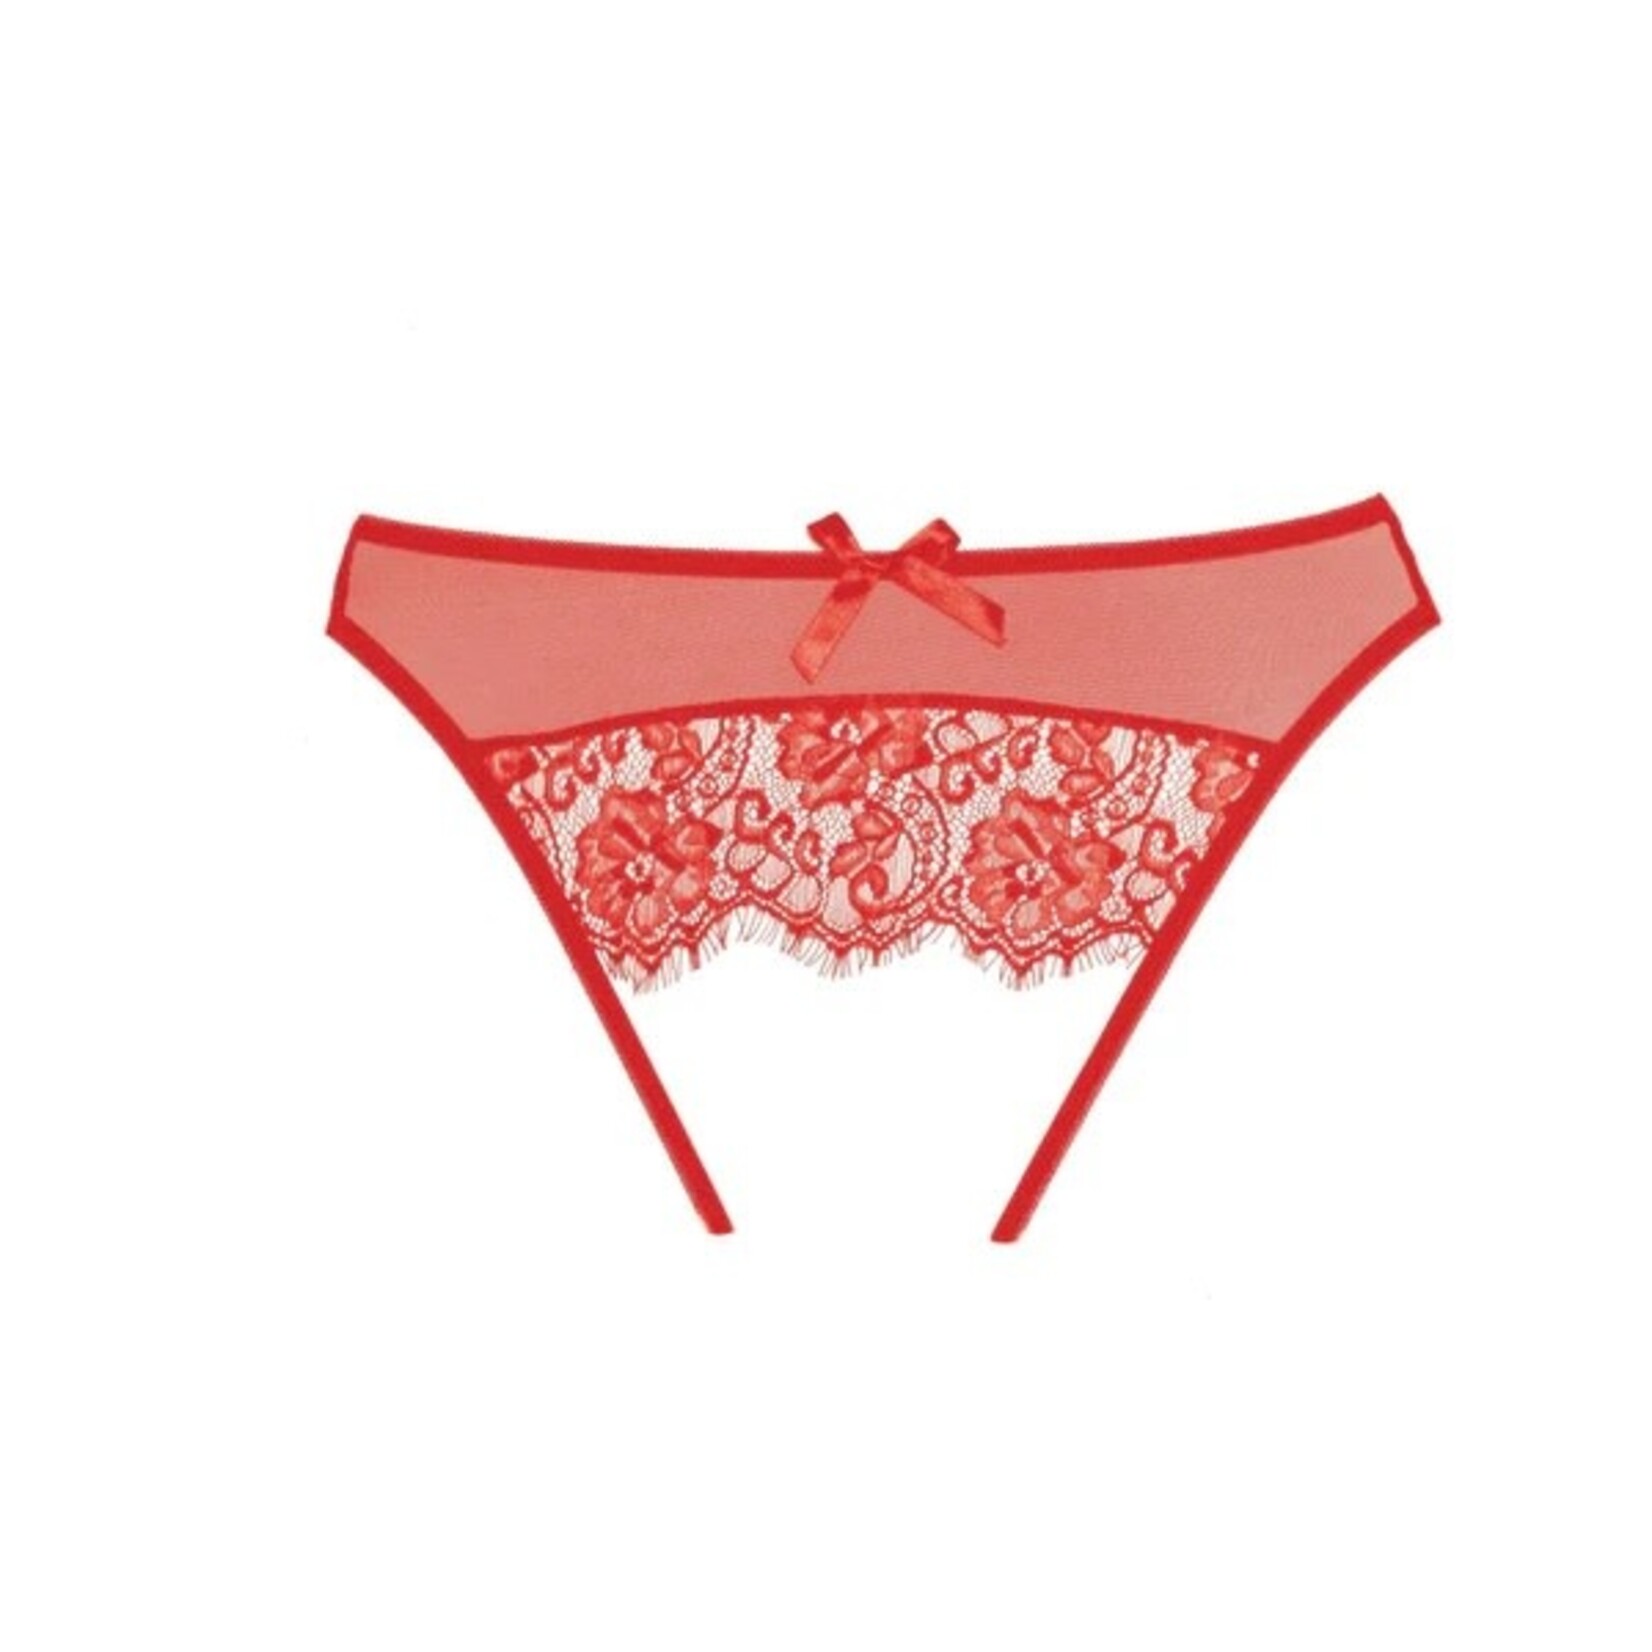 ALLURE LINGERIE ALLURE ADORE - EXPOSE RED PANTY - O/S